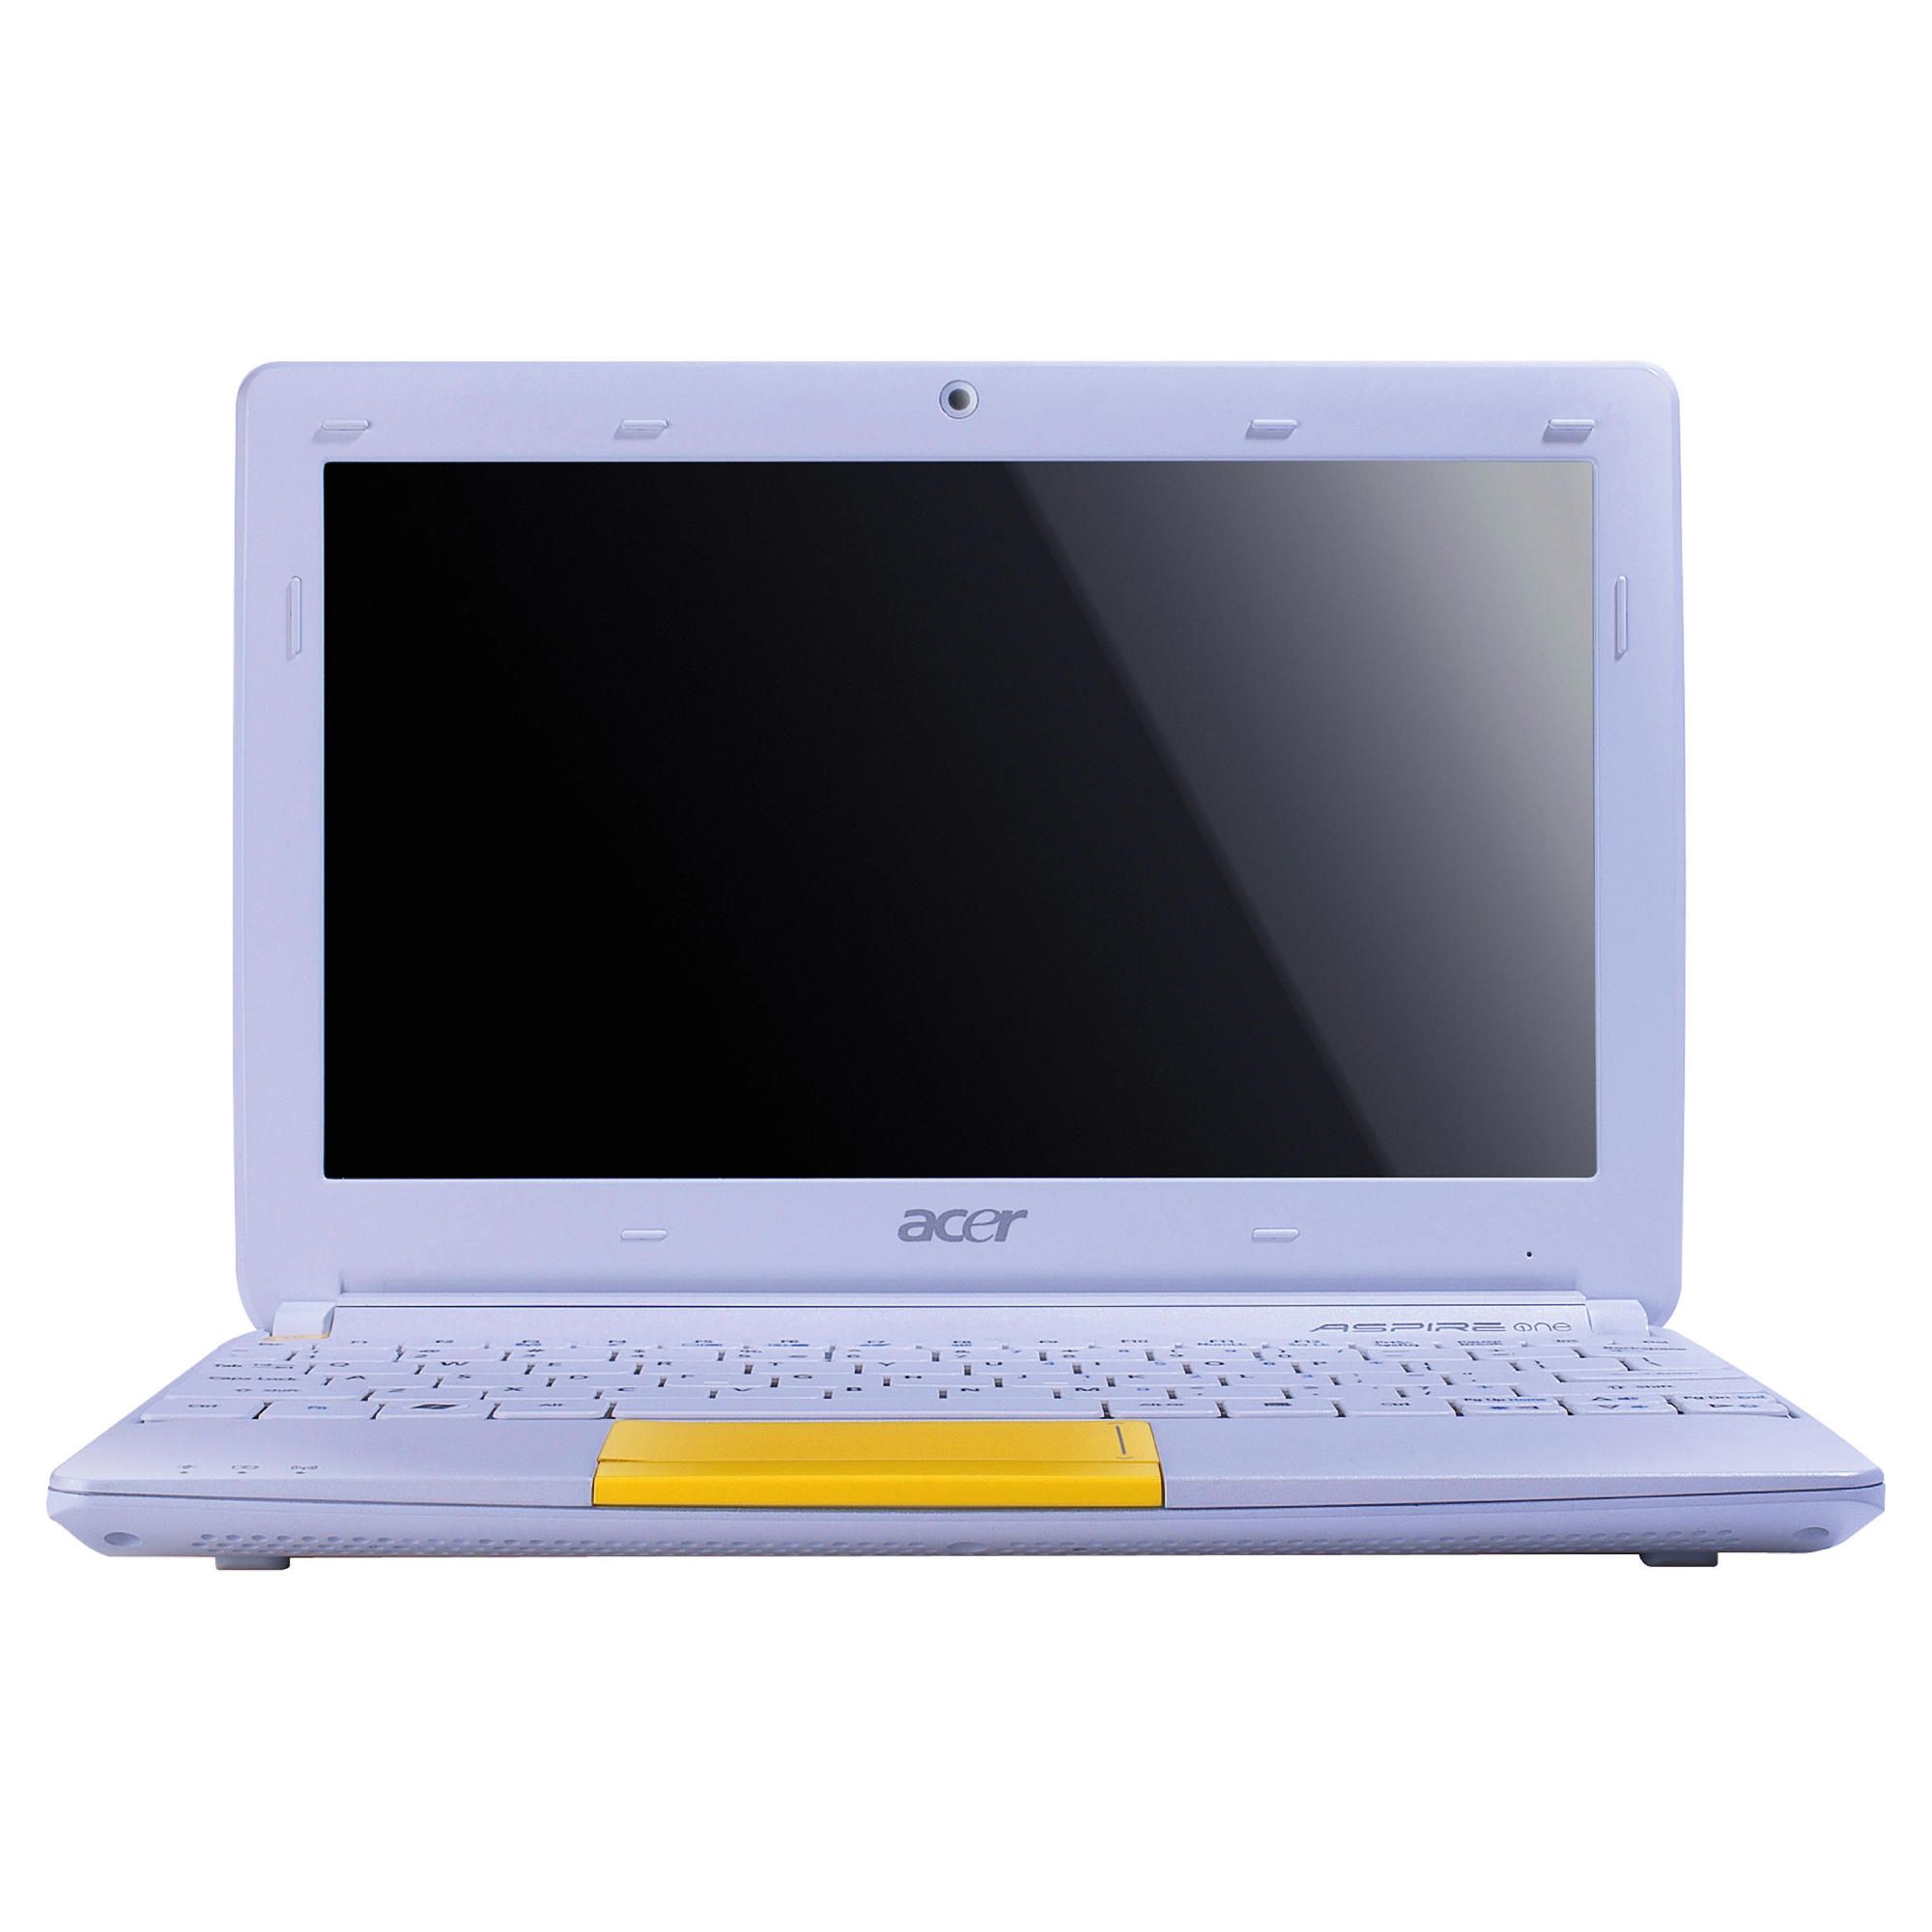 Acer Happy 2 Netbook (Intel Atom, 1.5GHz, 1GB, 250GB, 10.1'' Display) Yellow at Tesco Direct